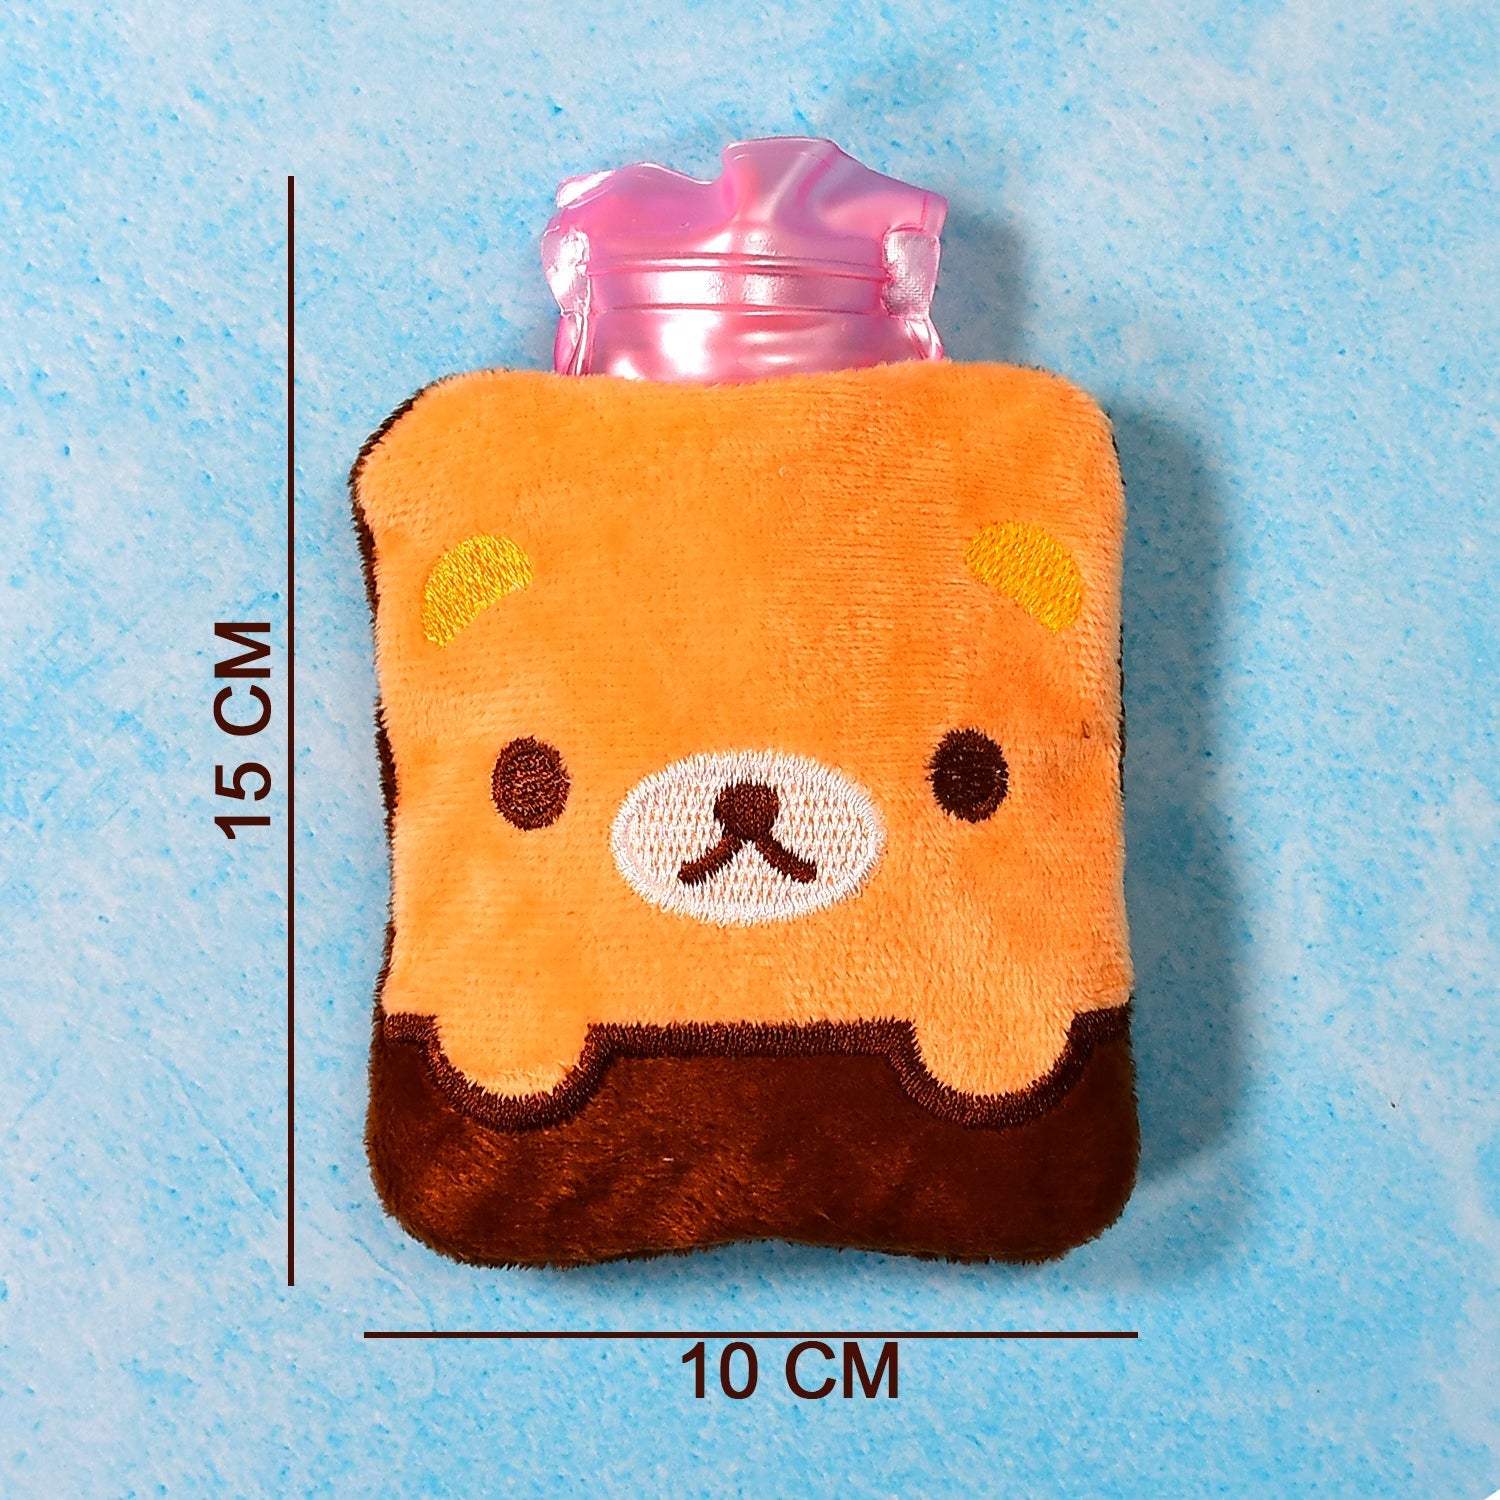 6527 Brown Panda Print small Hot Water Bag with Cover for Pain Relief, Neck, Shoulder Pain and Hand, Feet Warmer, Menstrual Cramps. 